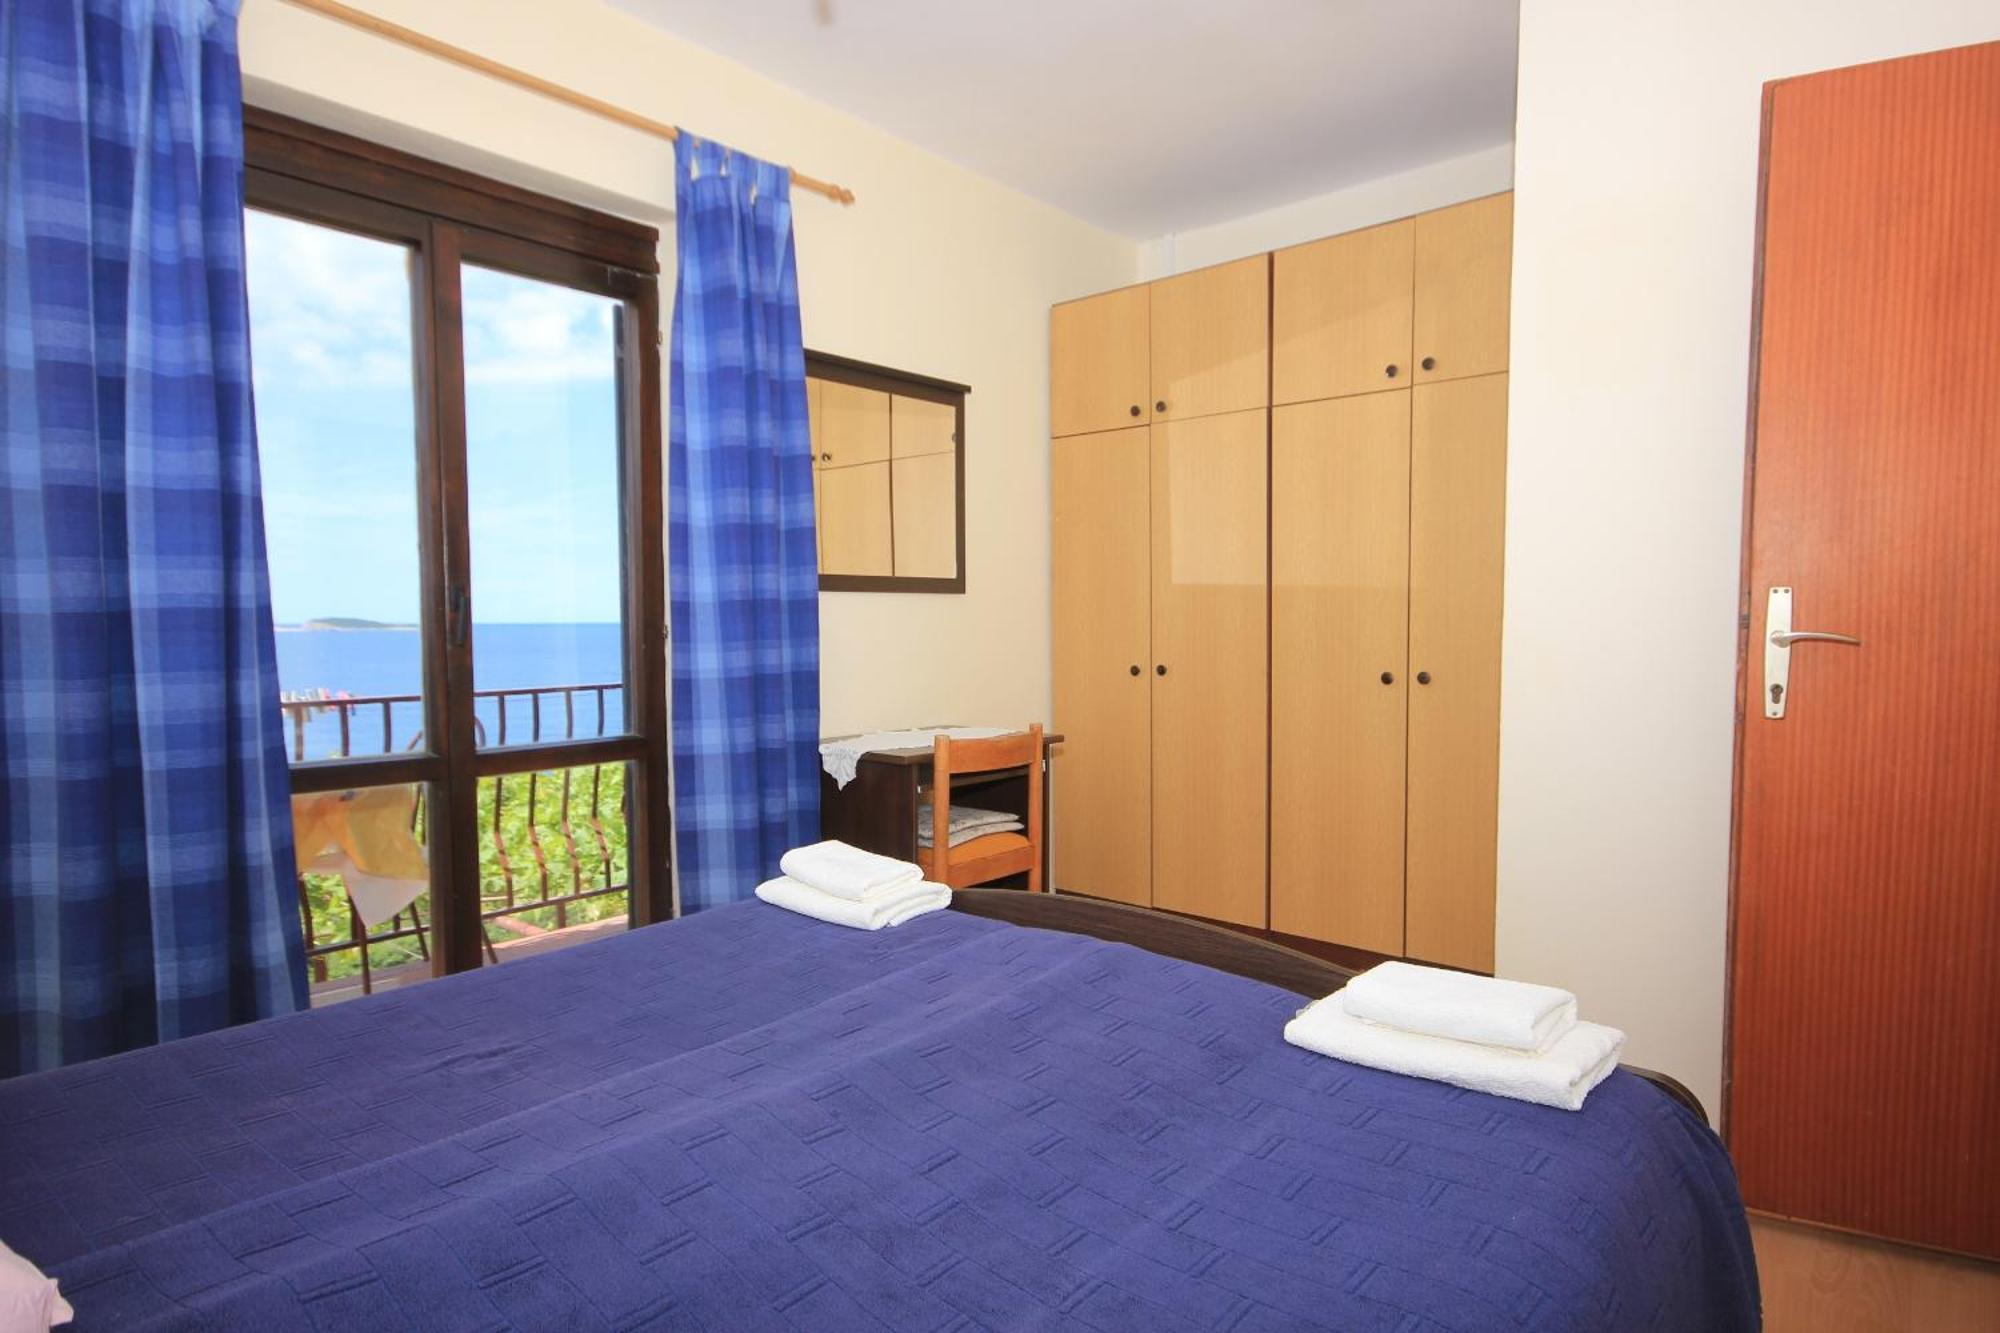 Apartments By The Sea Soline, Dubrovnik - 8825 米利尼 客房 照片